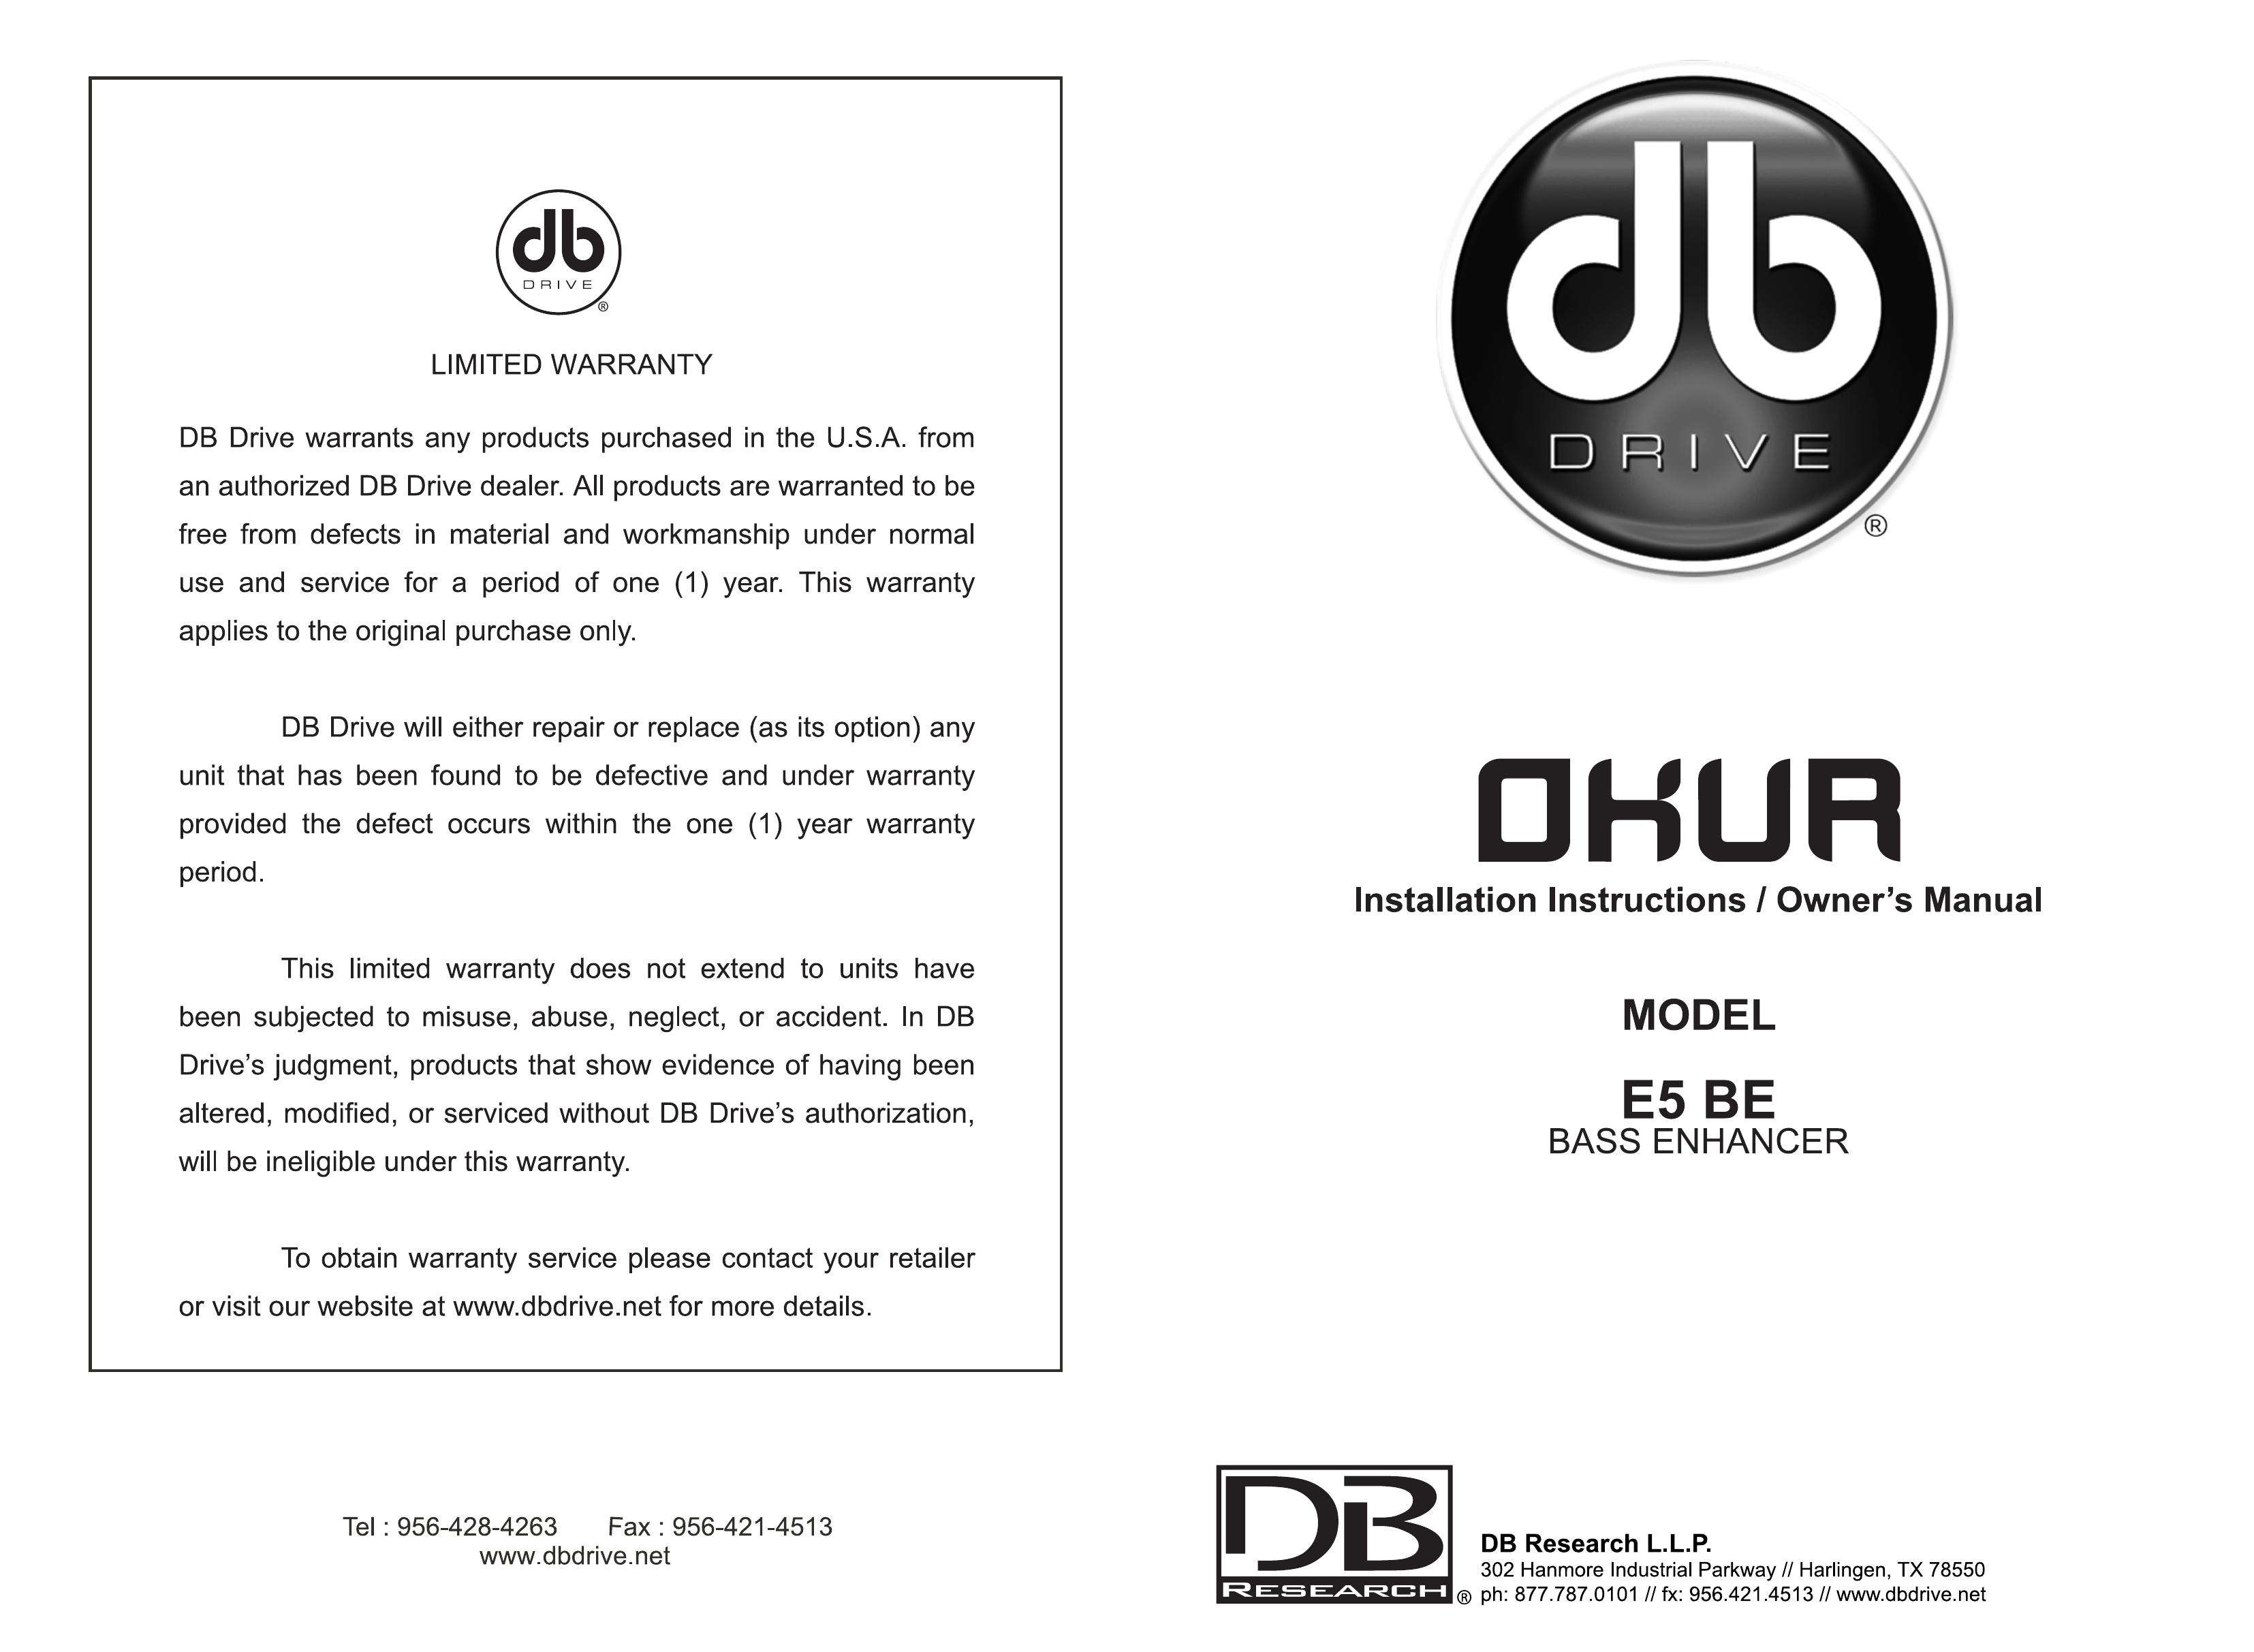 DB Drive E5 BE Musical Instrument Amplifier User Manual